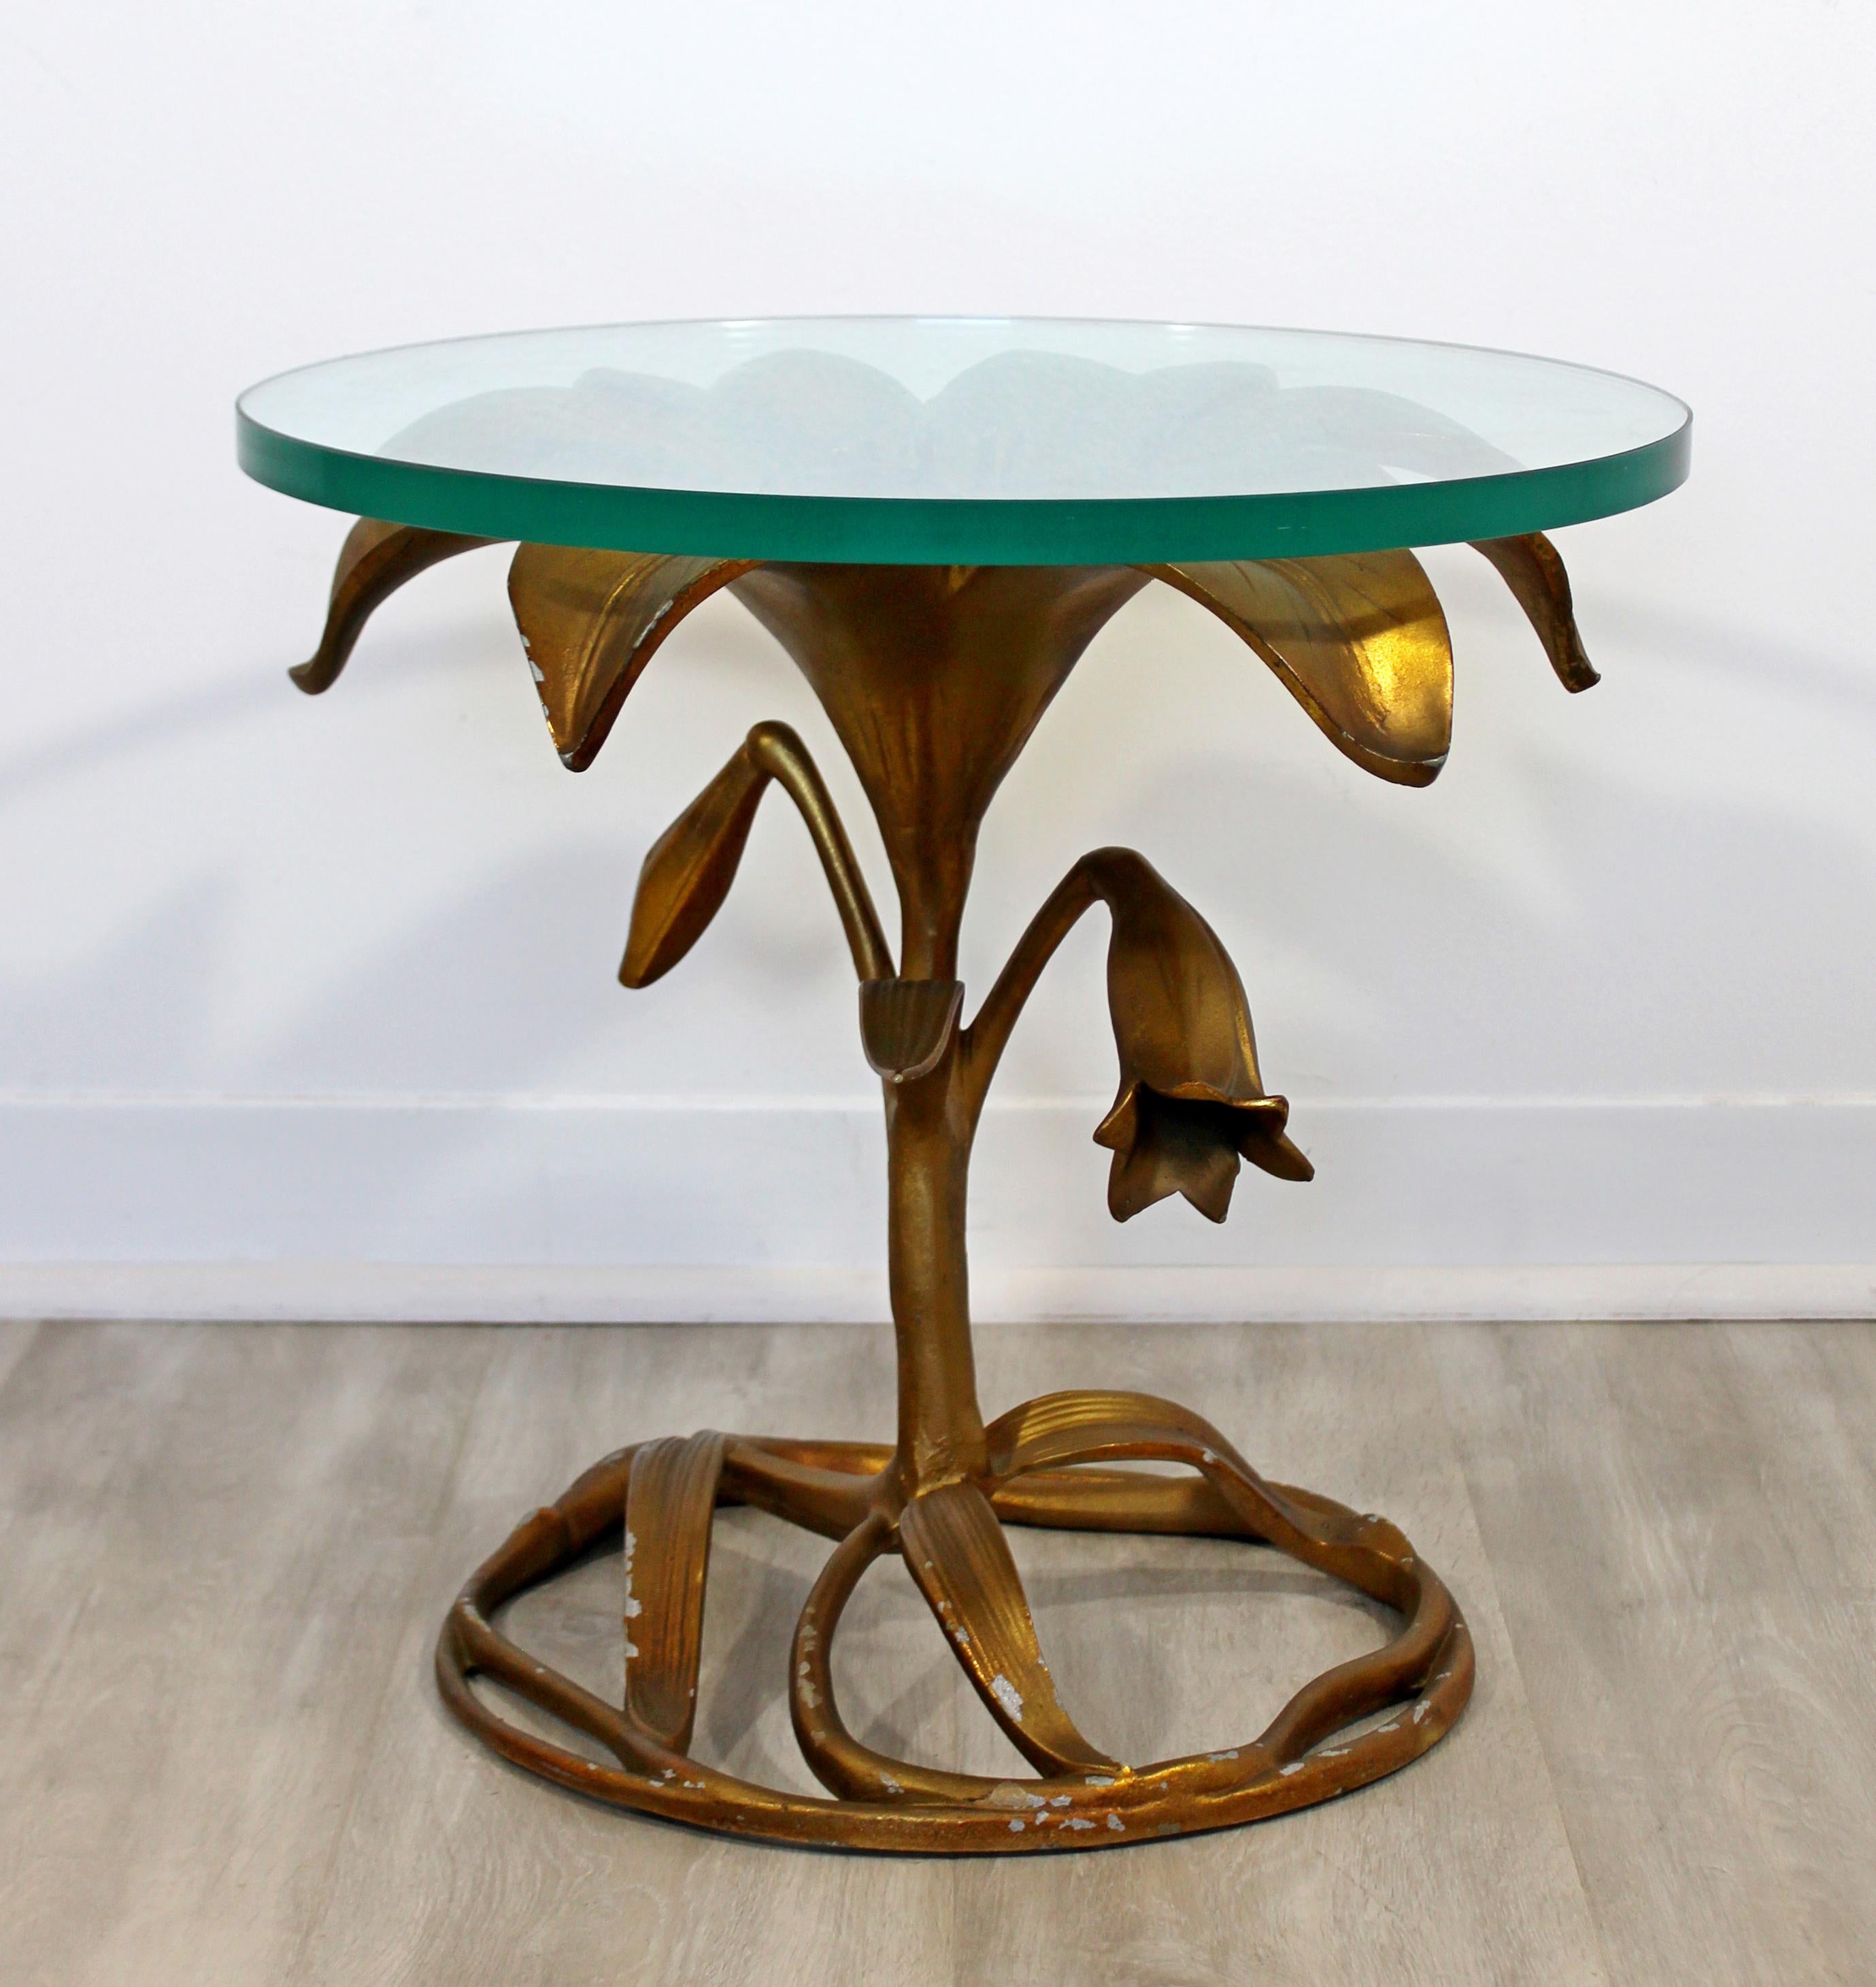 For your consideration is a stunning, Hollywood Regency flower side table, made of brass and with a glass tabletop, by Arthur Court, circa 1980s. In good vintage condition. The dimensions are 18.5